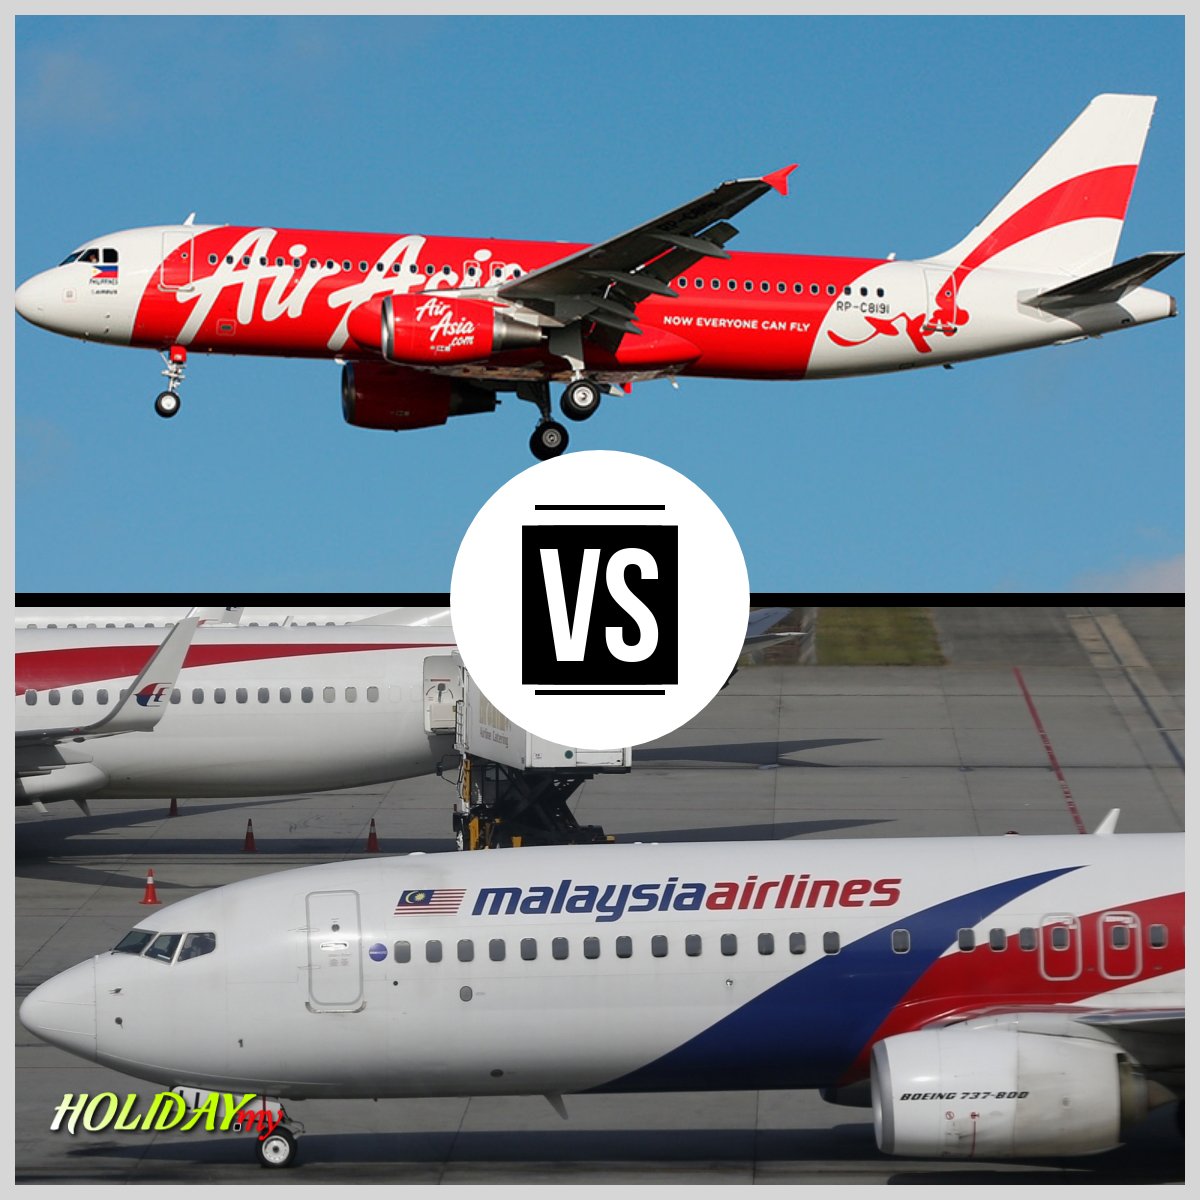 Why people prefer Malaysia Airlines instead of Air Asia